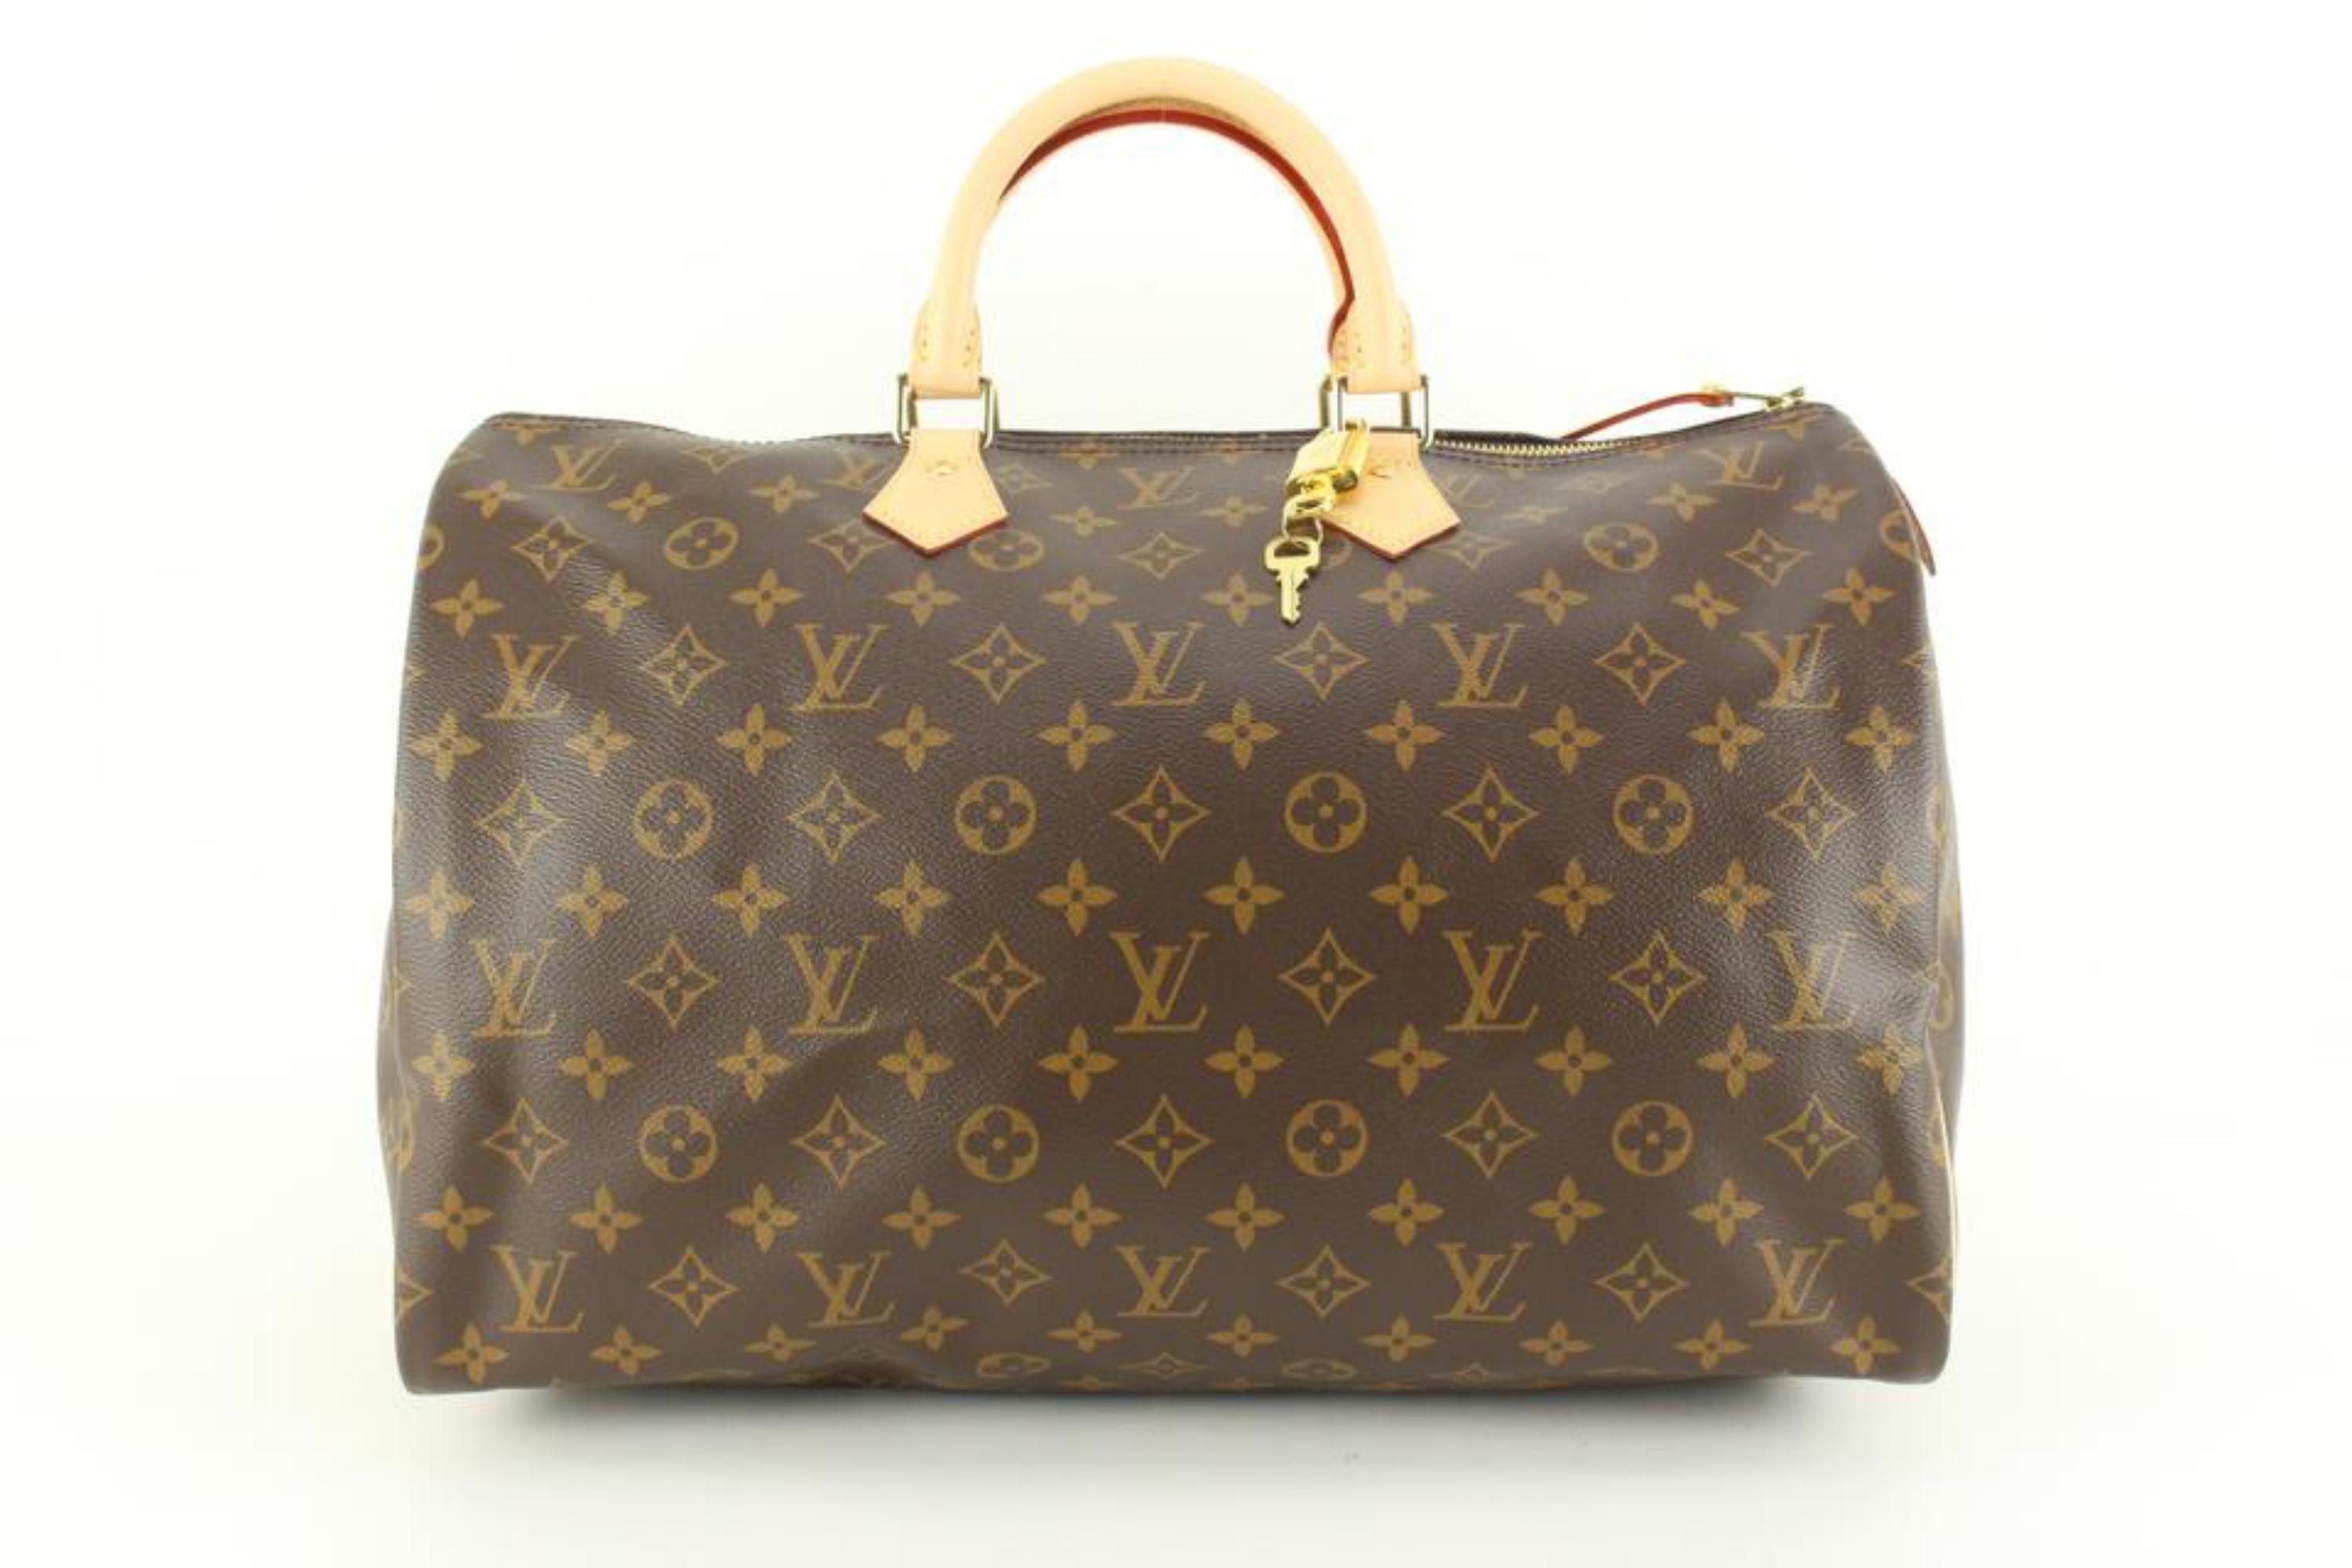 Louis Vuitton Rare Large Monogram Speedy 40 Boston Bag GM 50lk725s In Good Condition For Sale In Dix hills, NY